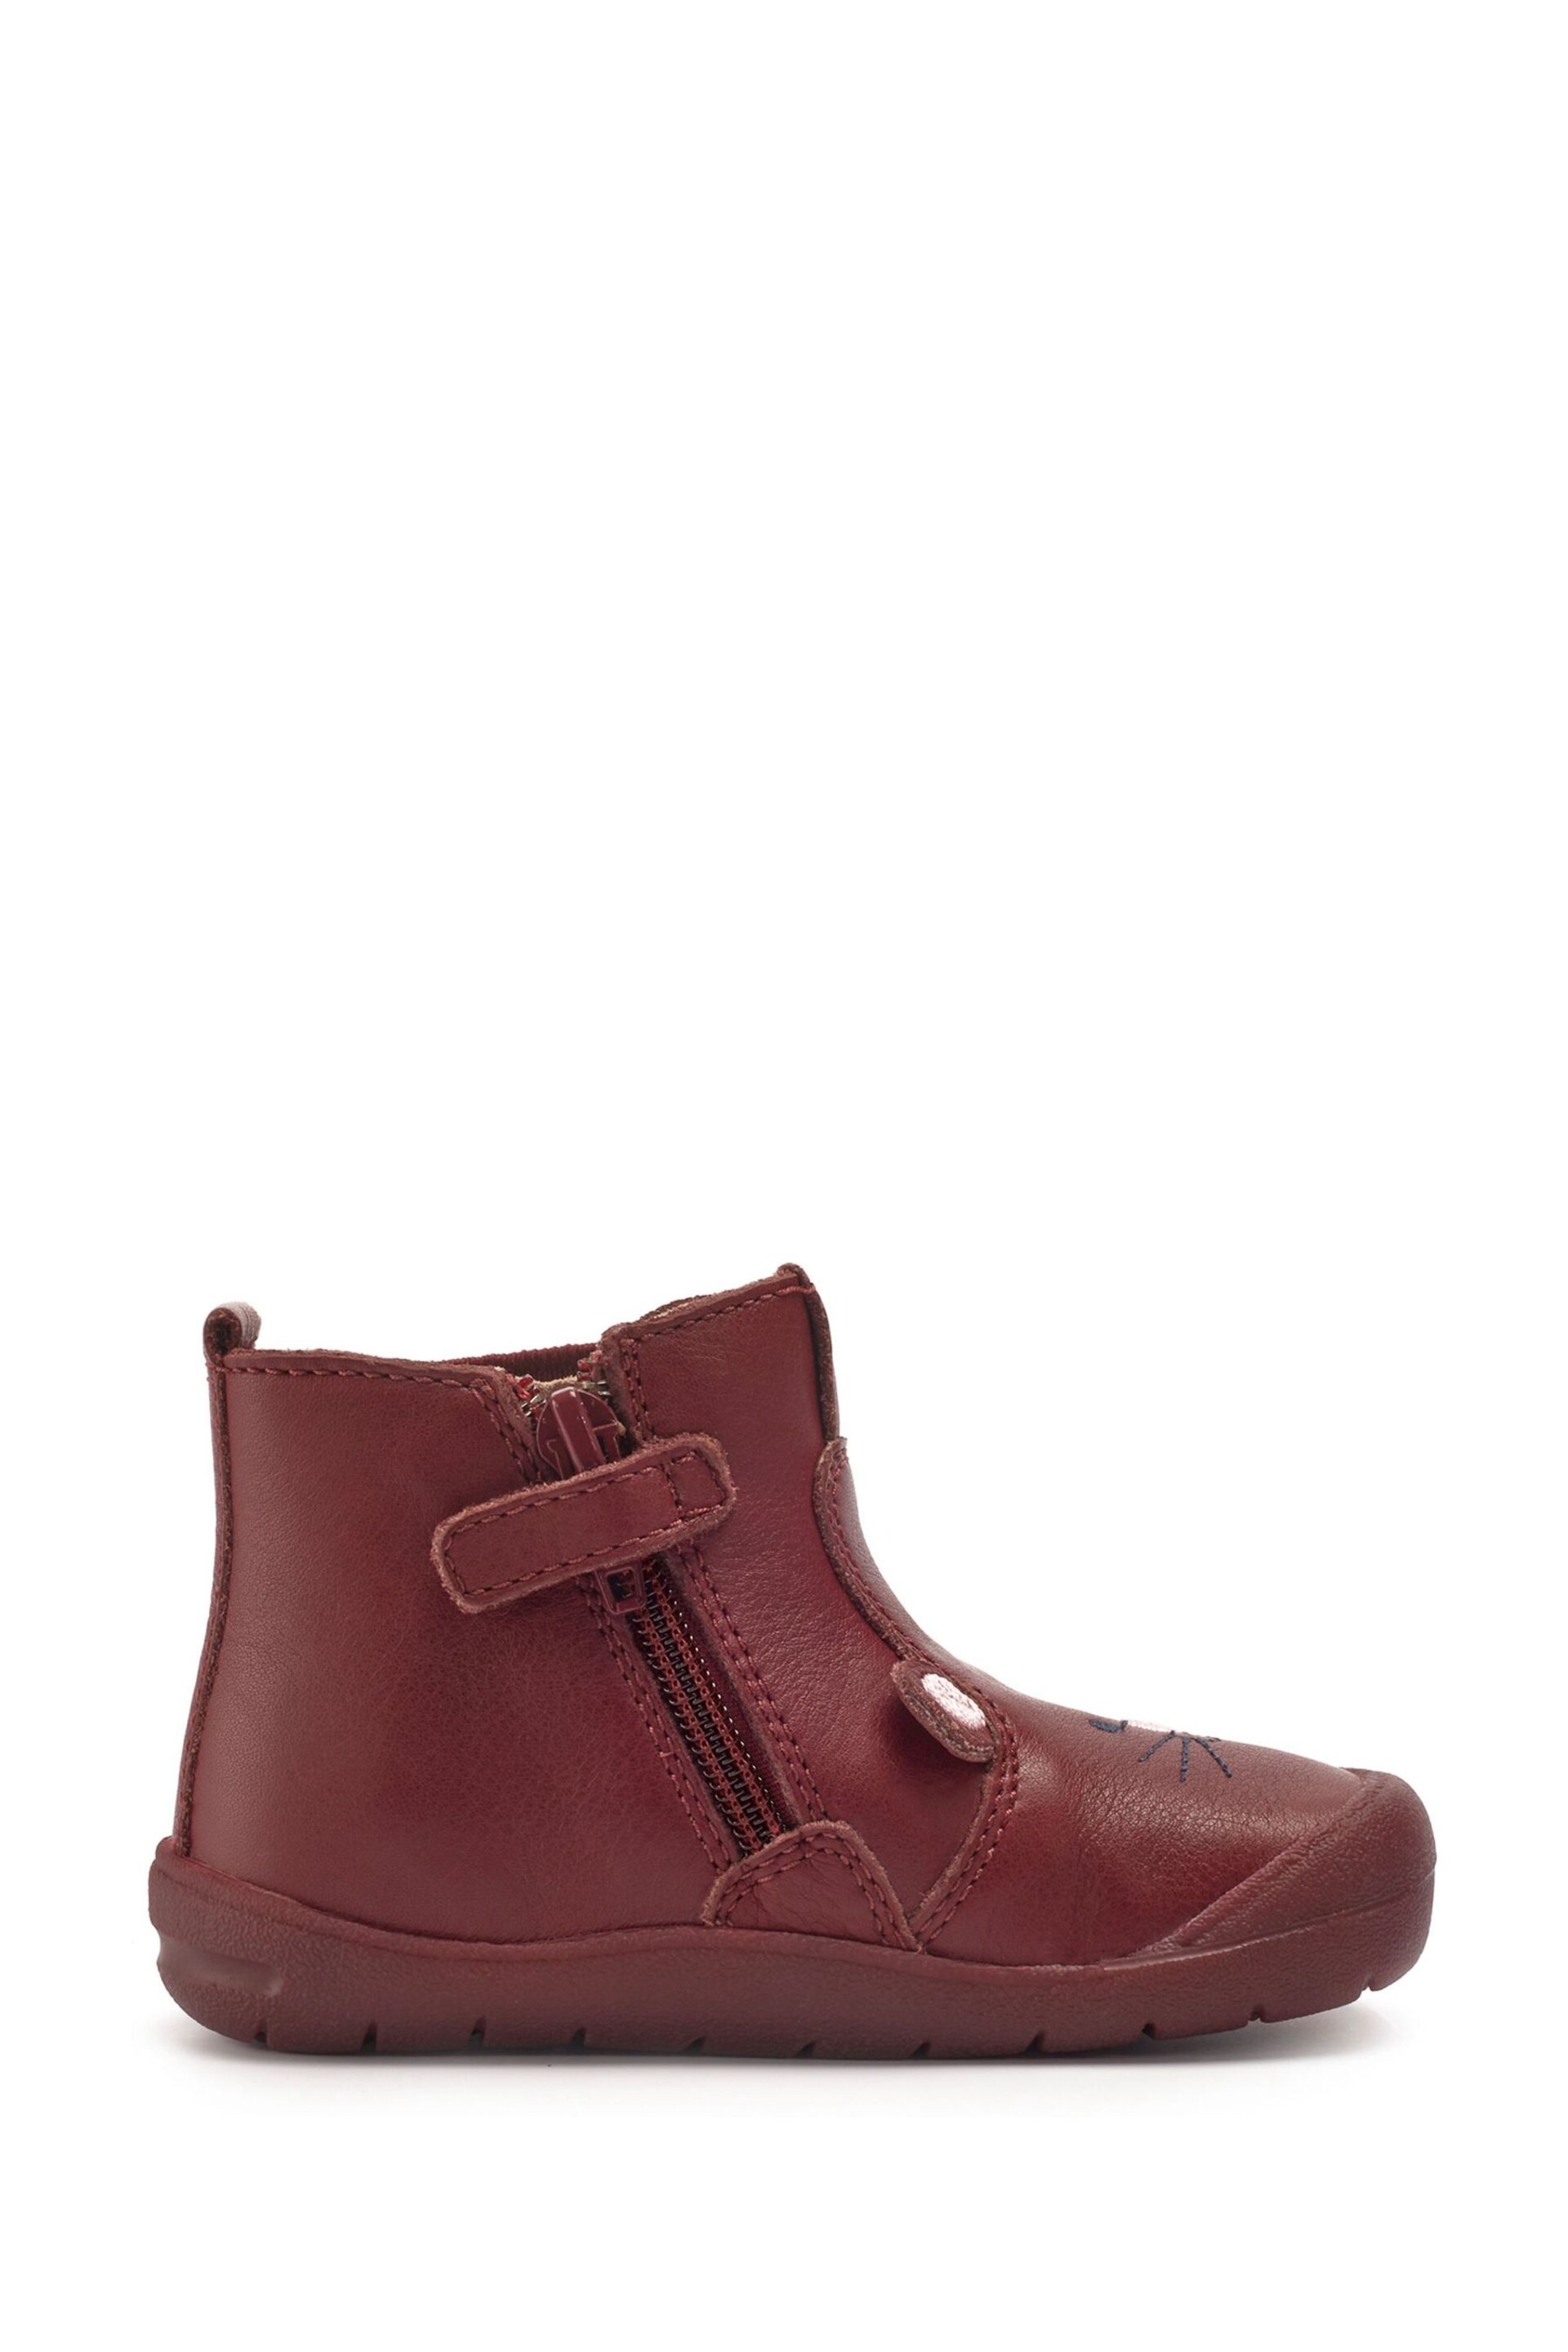 Start Rite x JoJo Friend Red Leather Zip Up Boots - Image 1 of 6